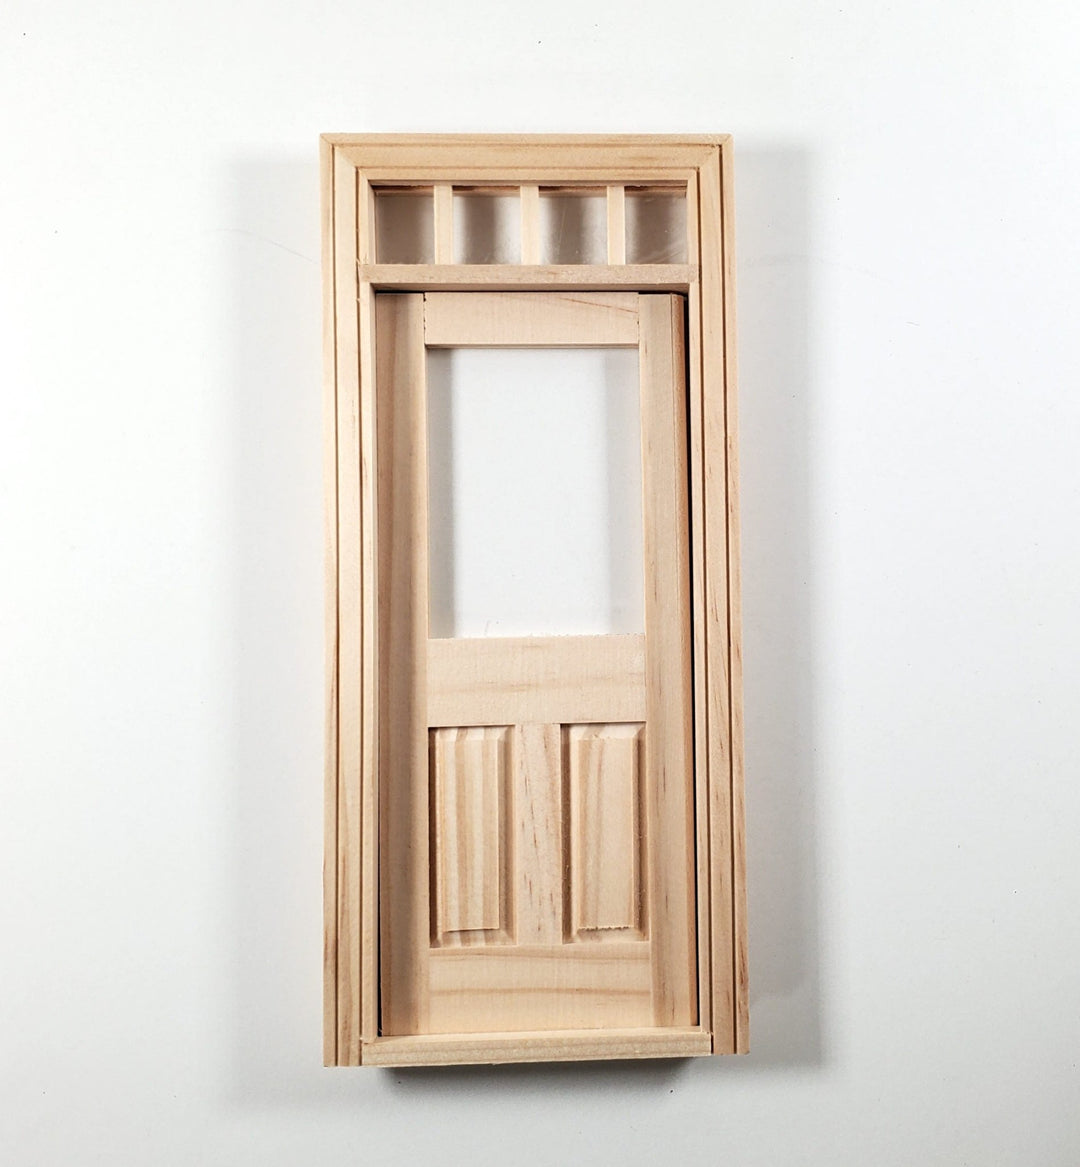 Dollhouse Exterior Door with Transom Window 1:12 Scale Houseworks #6018 - Miniature Crush